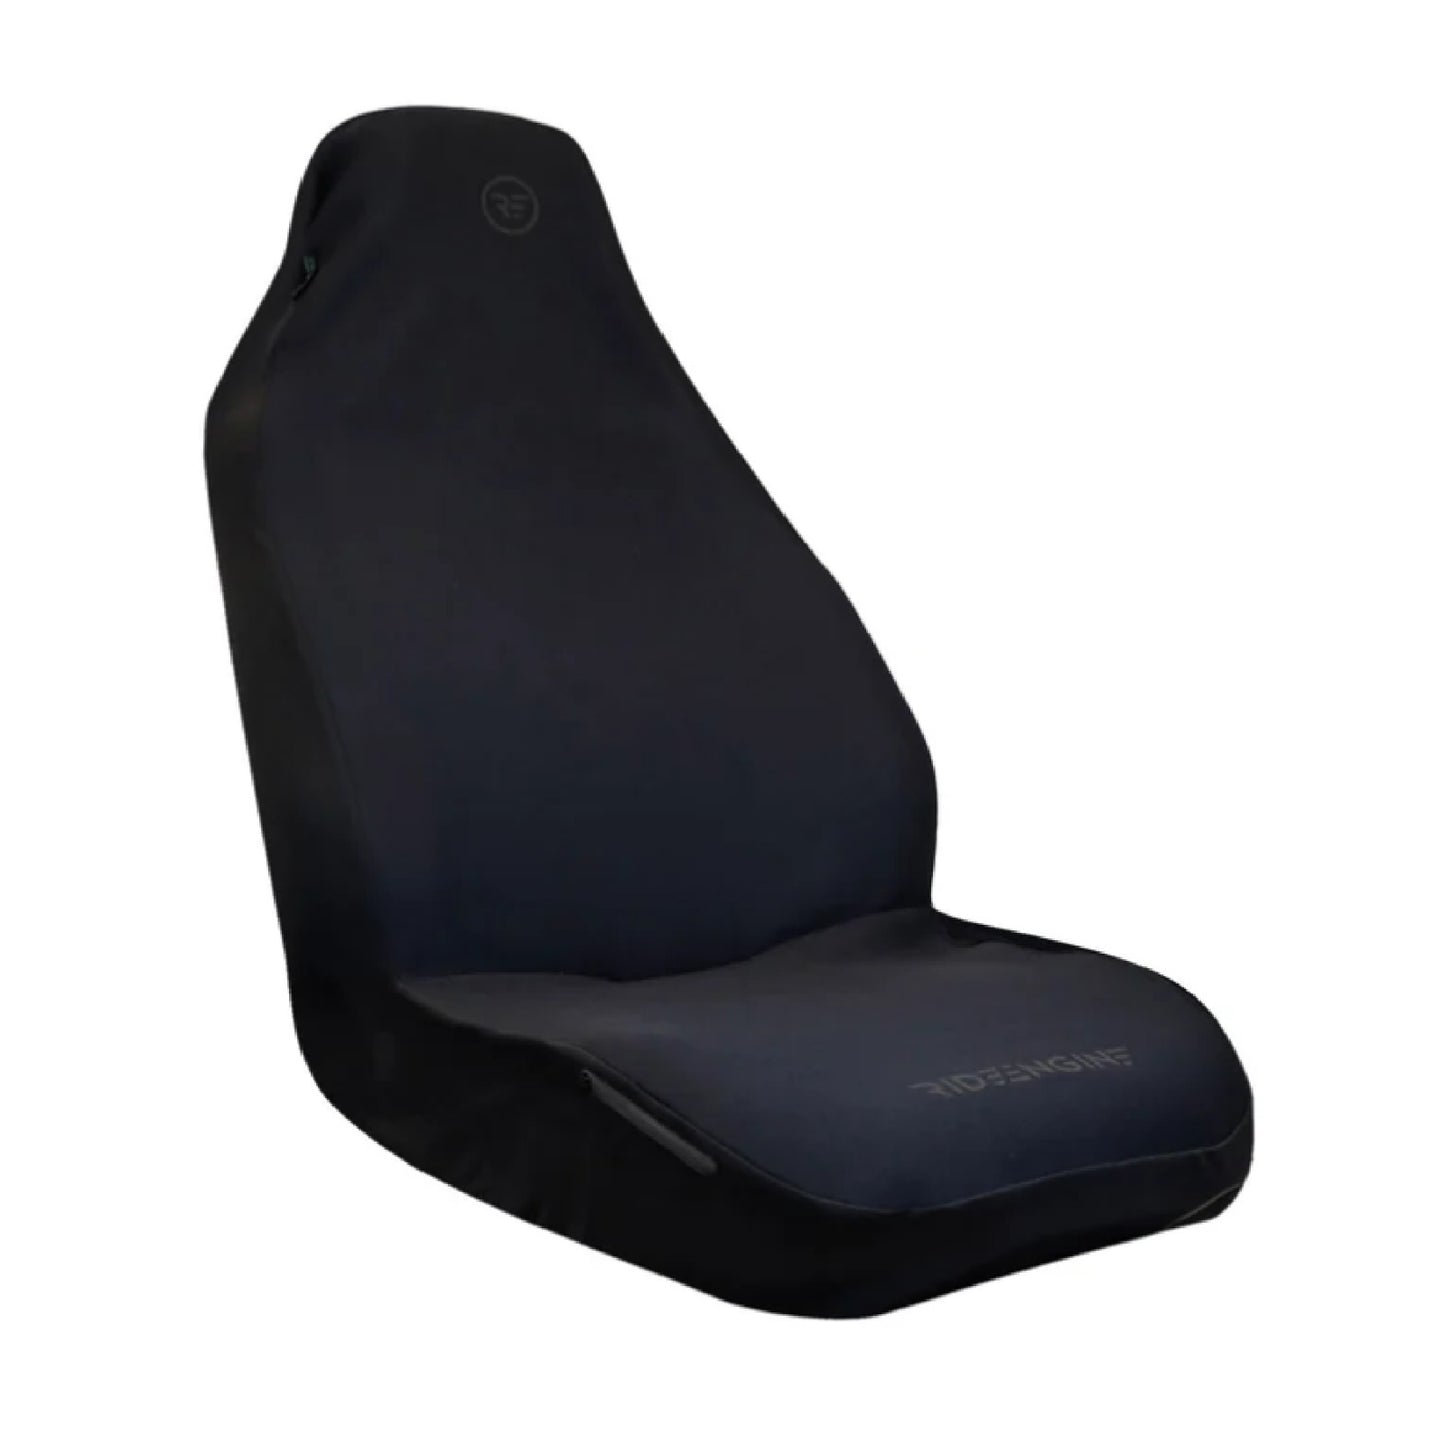 RIDE ENGINE ROAD WARRIOR SEAT COVER